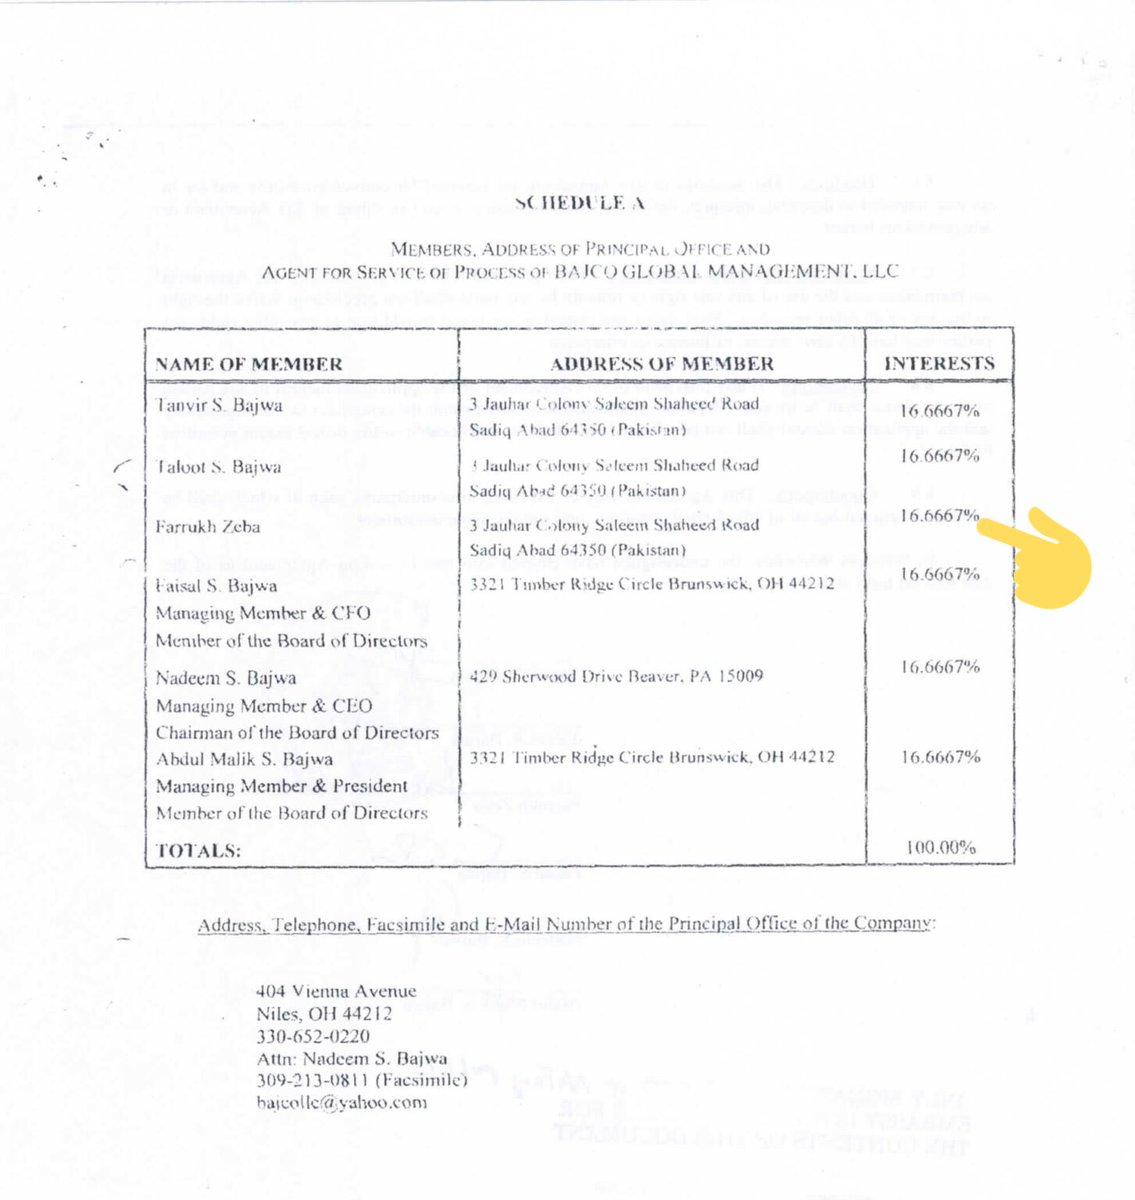 This means, if we’re to believe the baseless valuations of the Indian propaganda based report, even then the present value of the entire “empire of corruption” is$39.9-$9.5=$30.4mil&as per the report Gen Bajwa’s alleged corruption over 18years is16.67%*30.4=$4.8mil!! /30